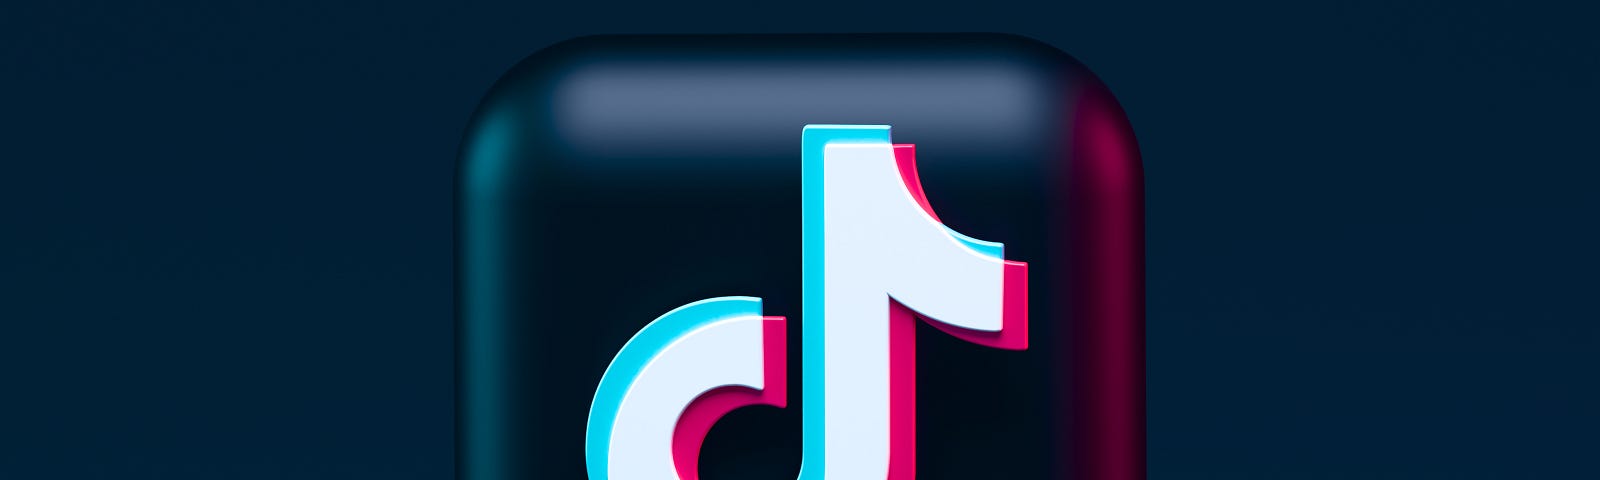 A 3D render of the TikTok logo and black button icon on a dark blue background